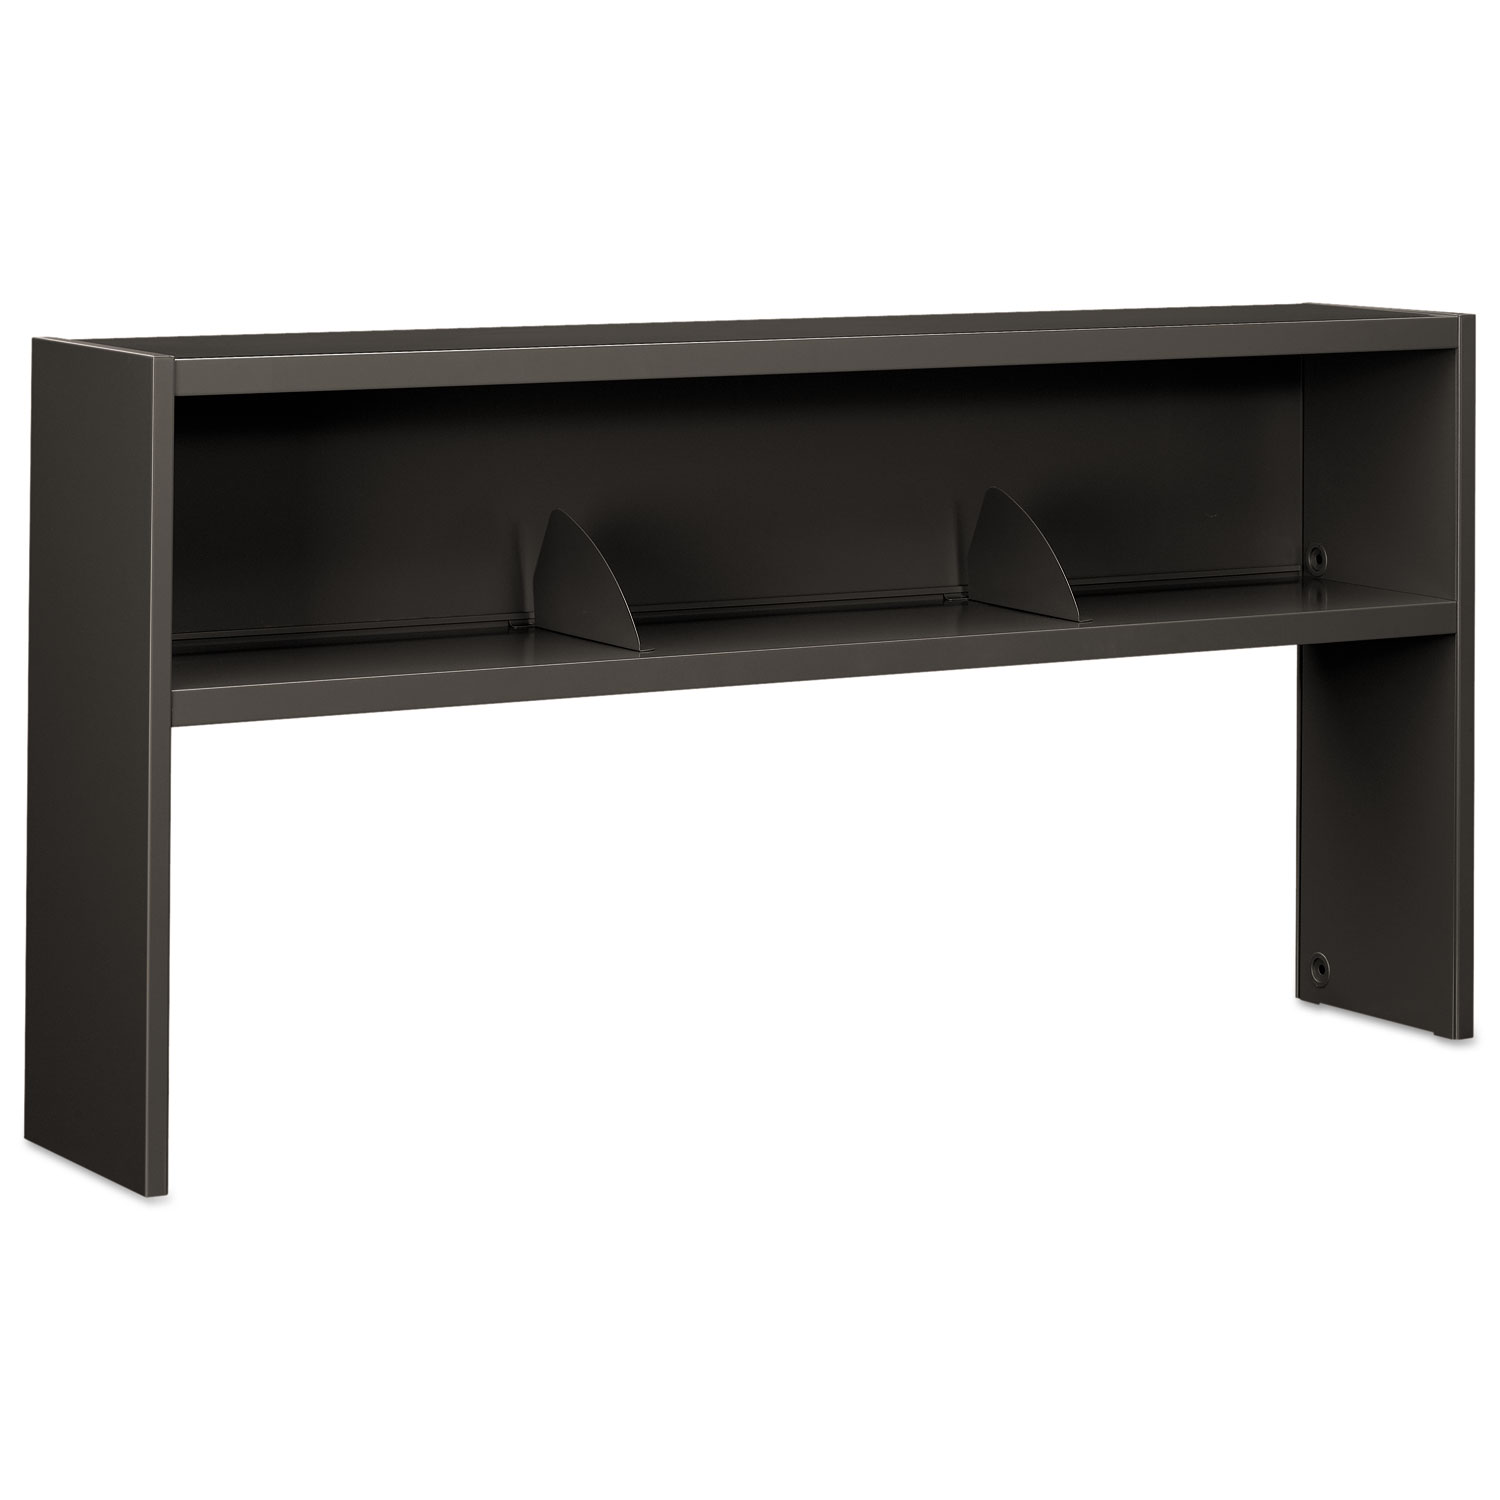 38000 Series Stack On Open Shelf Hutch, 72w x 13 1/2d x 34 3/4h, Charcoal